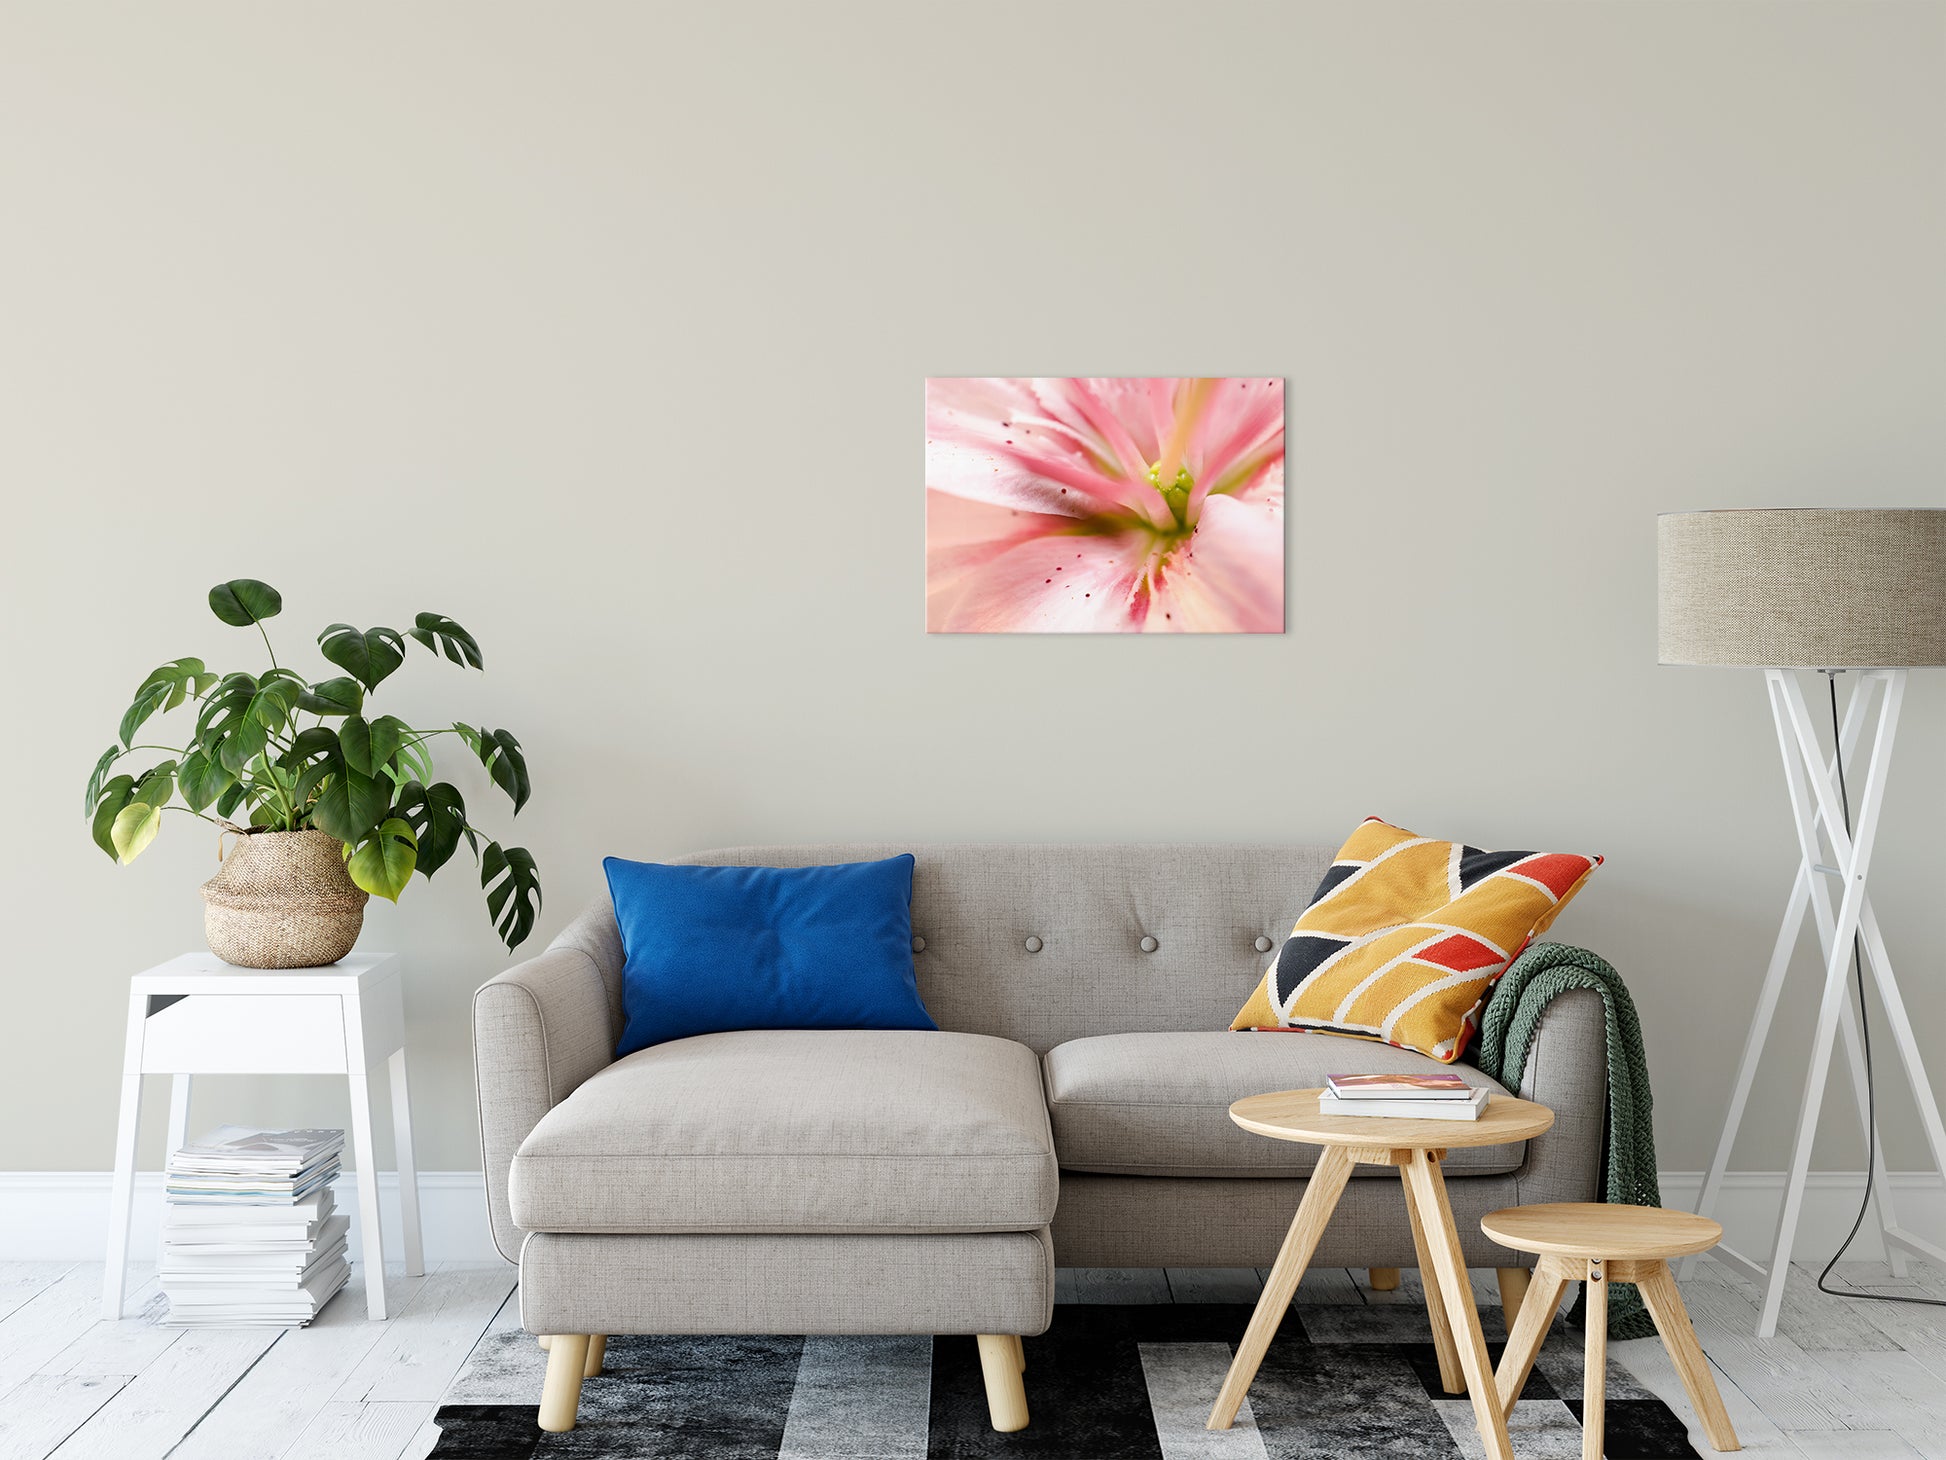 Center of the Stargazer Lily Nature / Floral Photo Fine Art Canvas Wall Art Prints 20" x 24" - PIPAFINEART